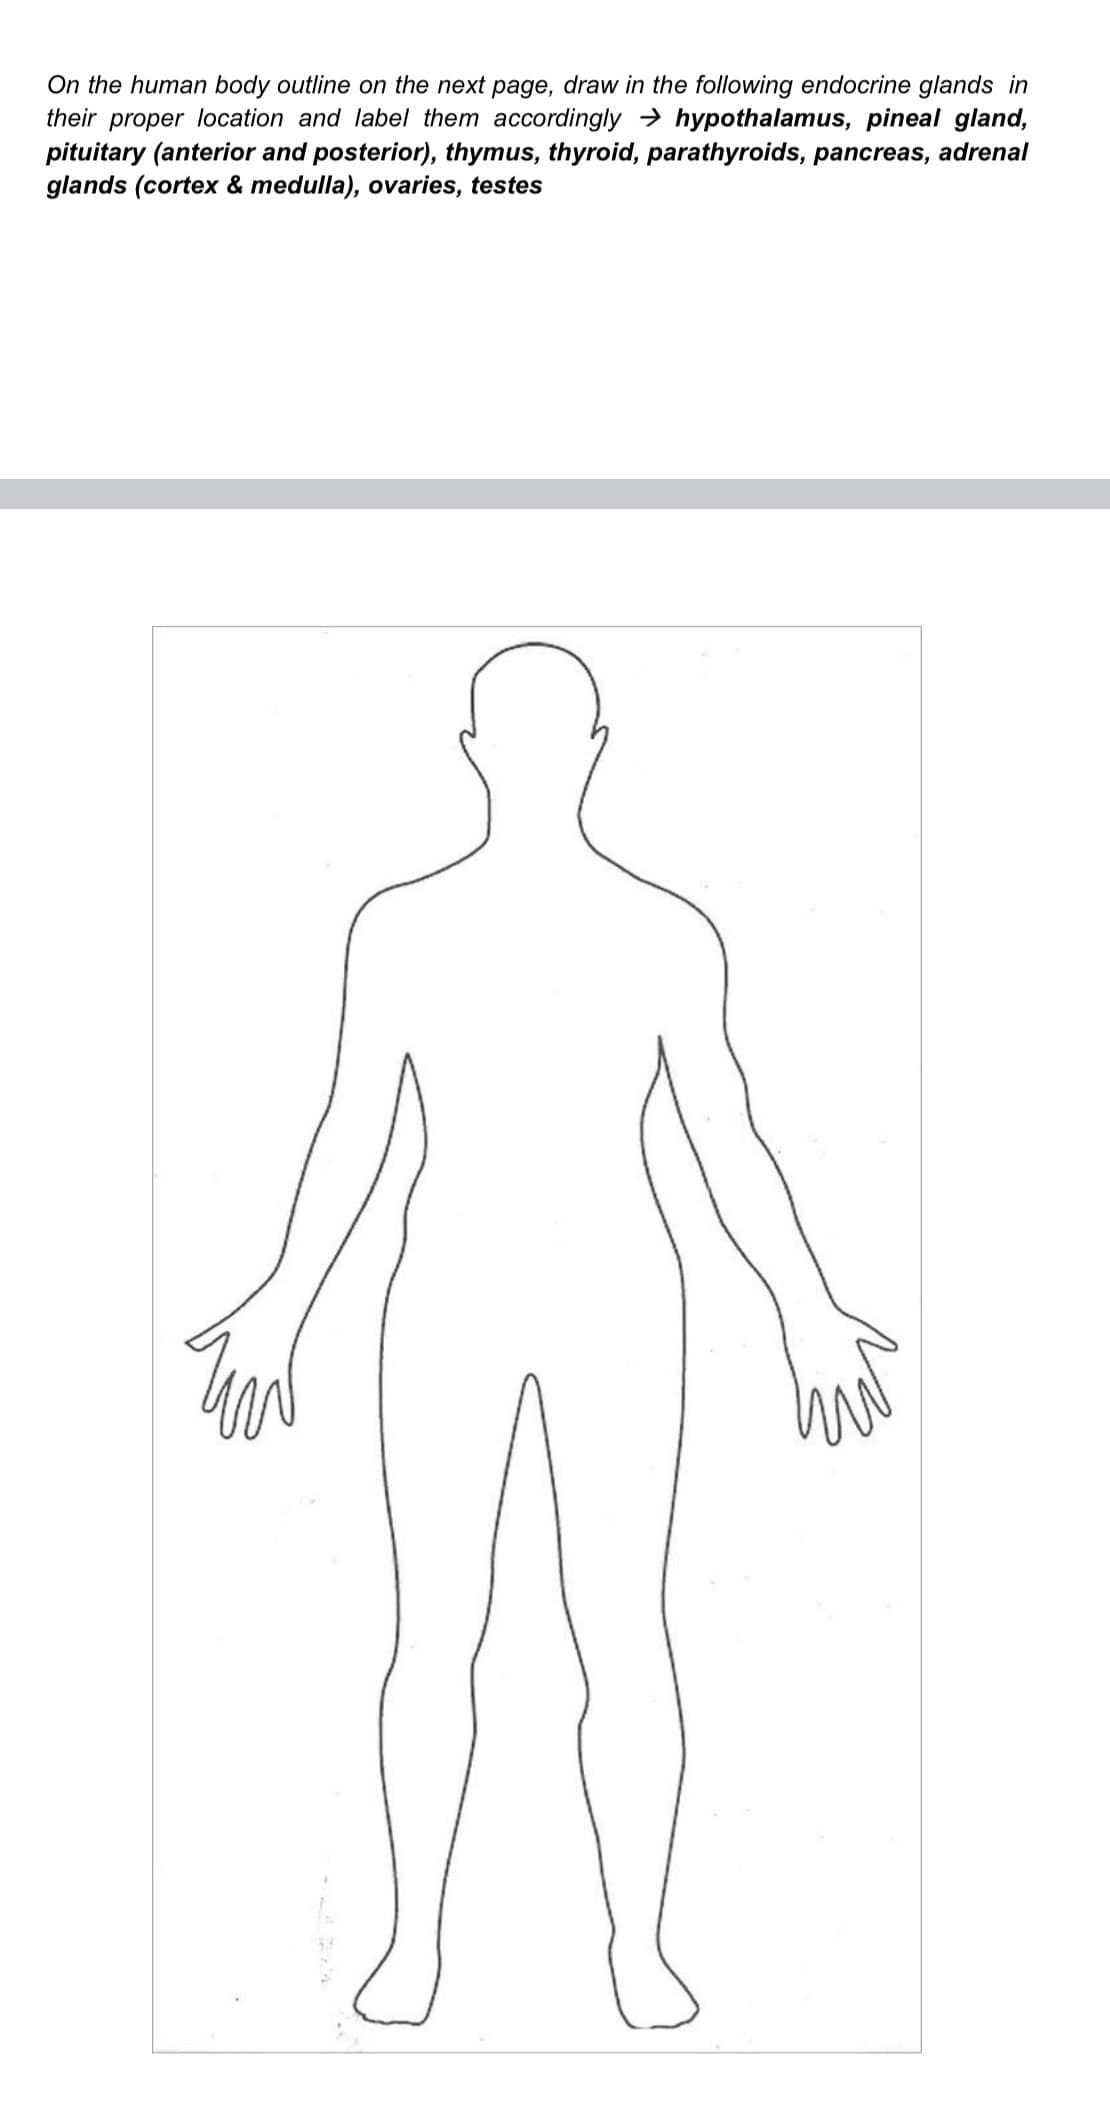 On the human body outline on the next page, draw in the following endocrine glands in
their proper location and label them accordingly → hypothalamus, pineal gland,
pituitary (anterior and posterior), thymus, thyroid, parathyroids, pancreas, adrenal
glands (cortex & medulla), ovaries, testes
11